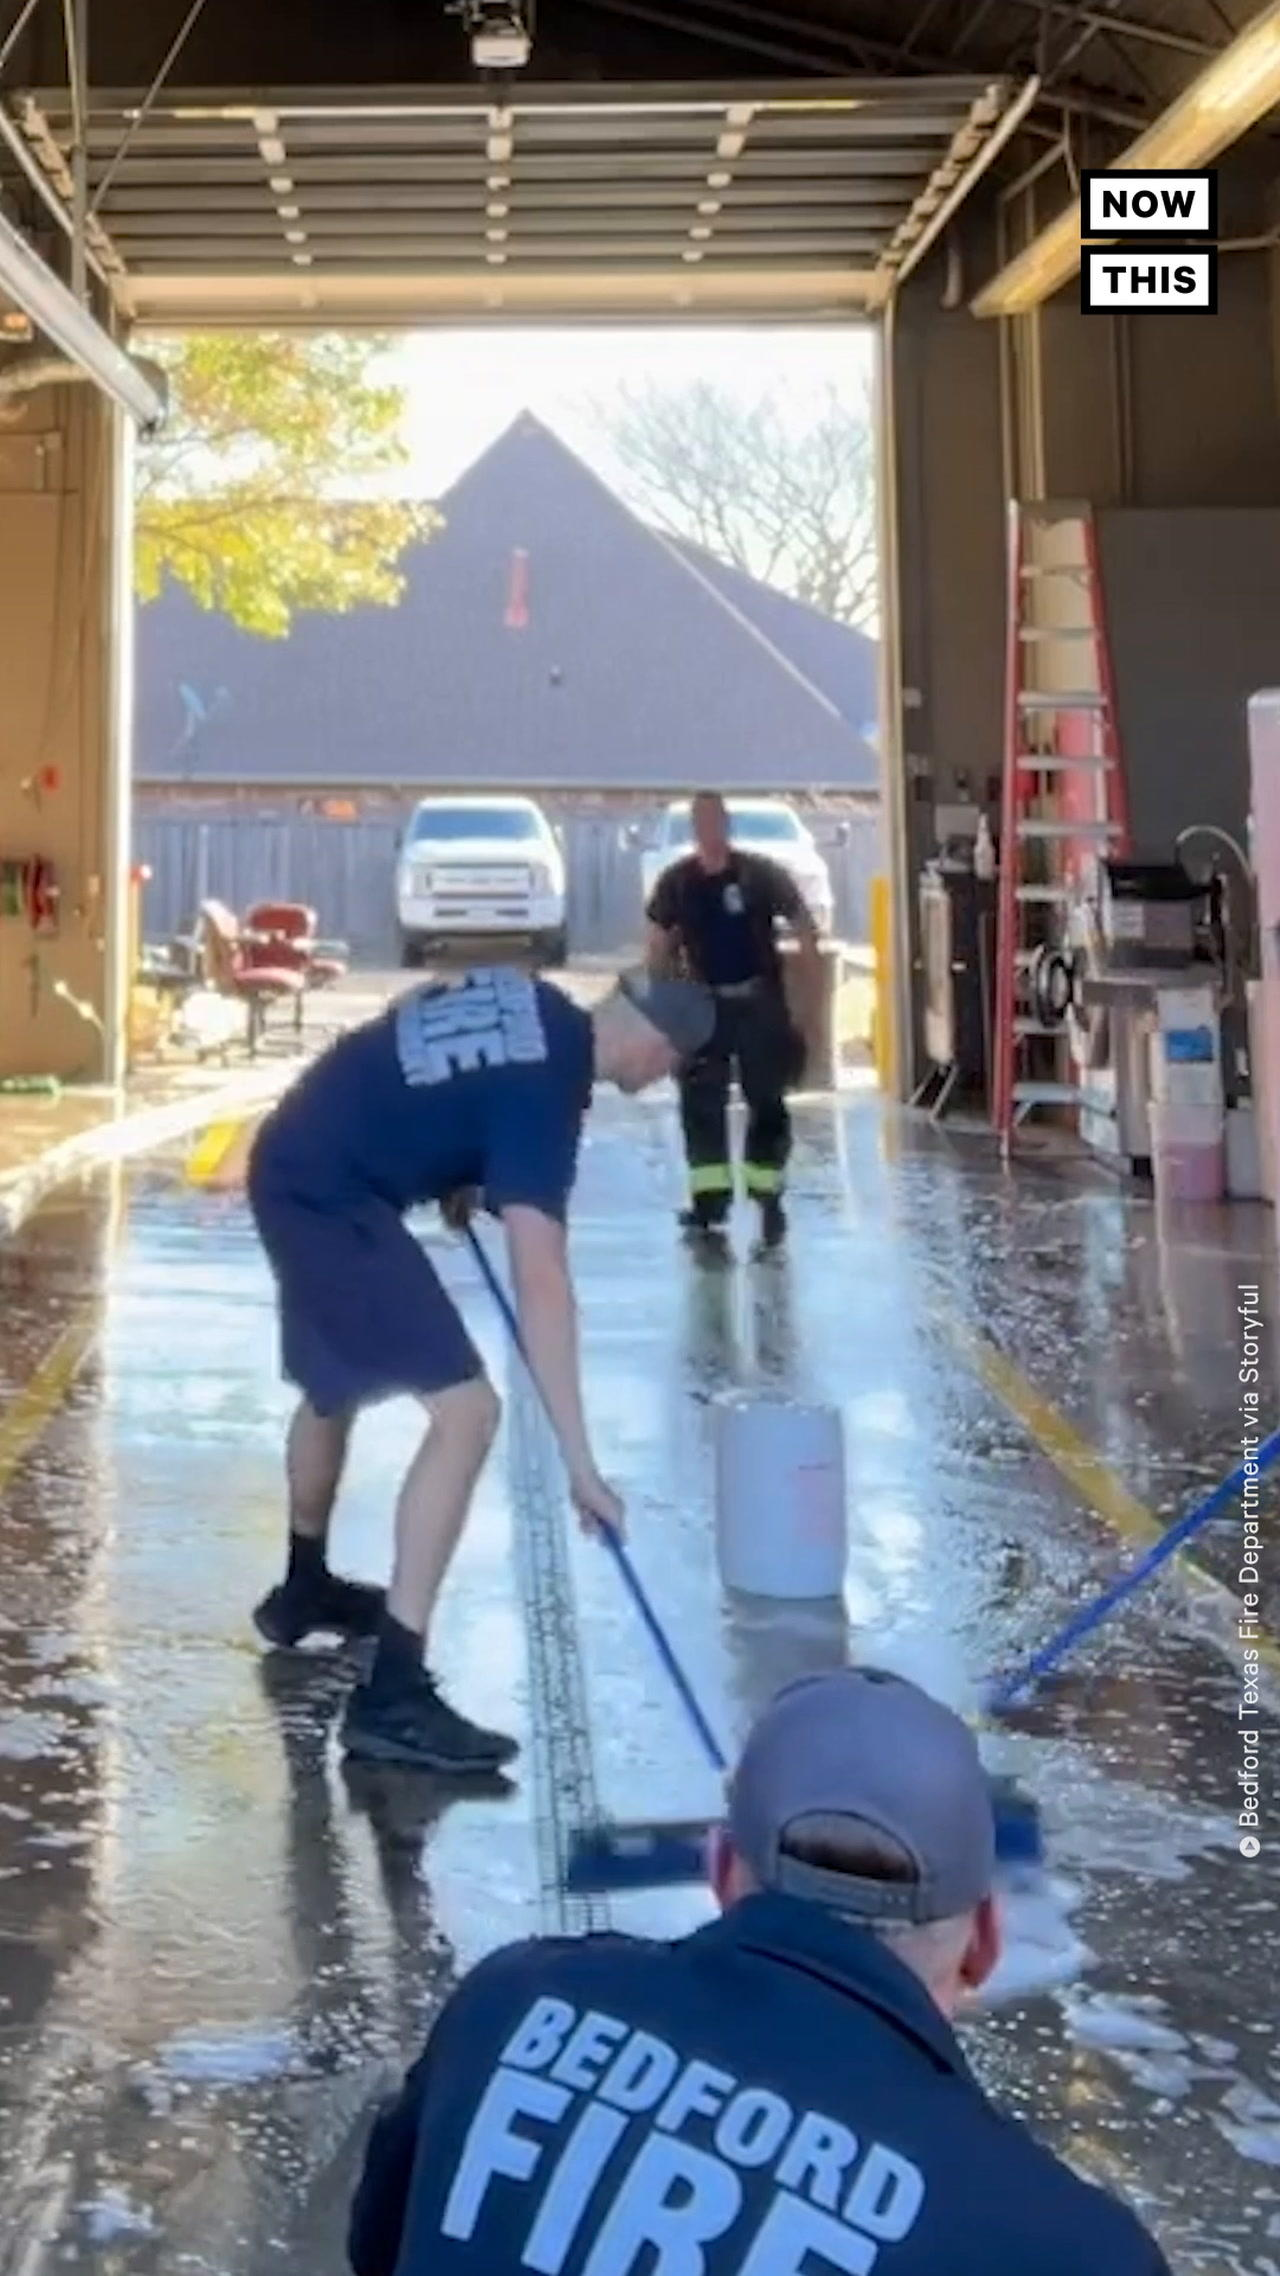 Fireman Practice Curling After Watching Olympics